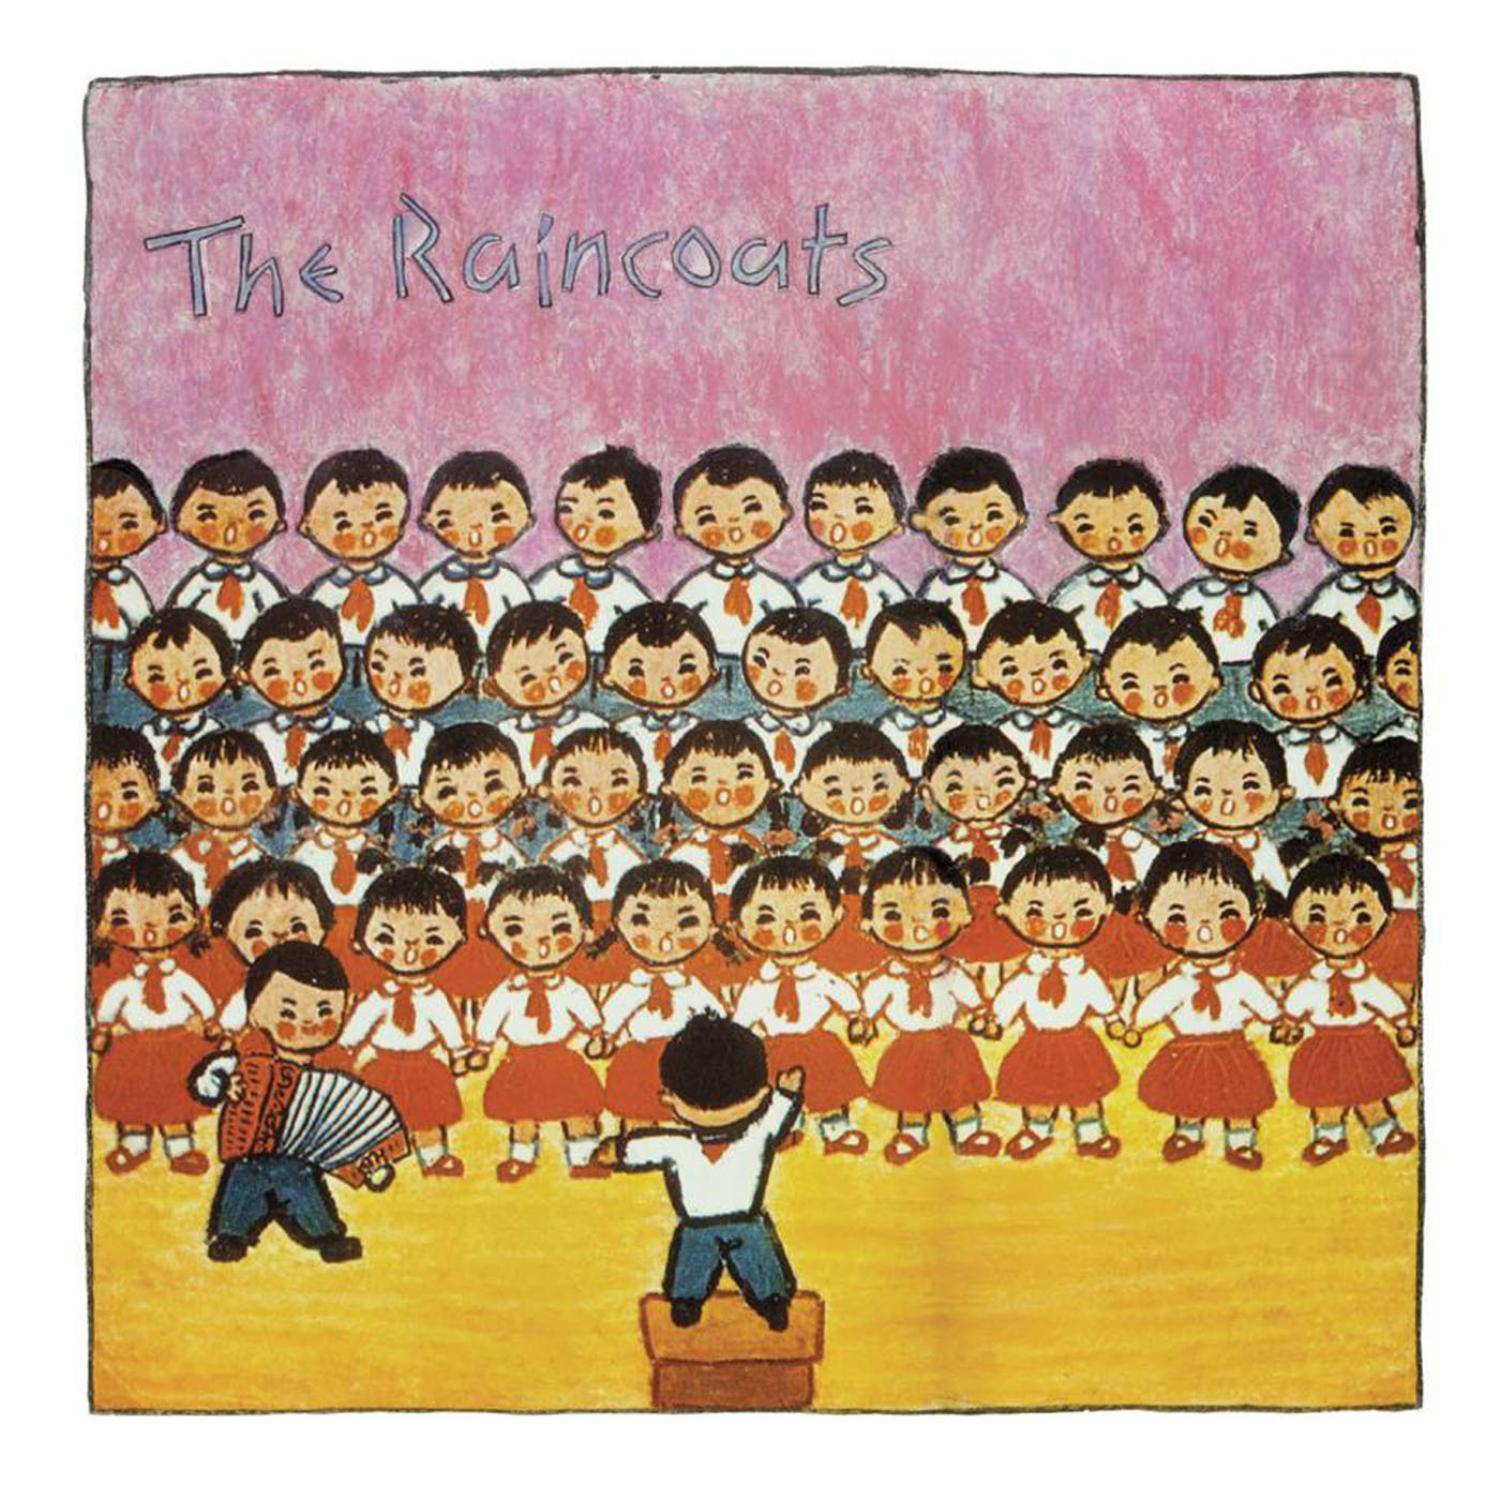 Fairytale in the Supermarket歌词 歌手The Raincoats-专辑The Raincoats-单曲《Fairytale in the Supermarket》LRC歌词下载